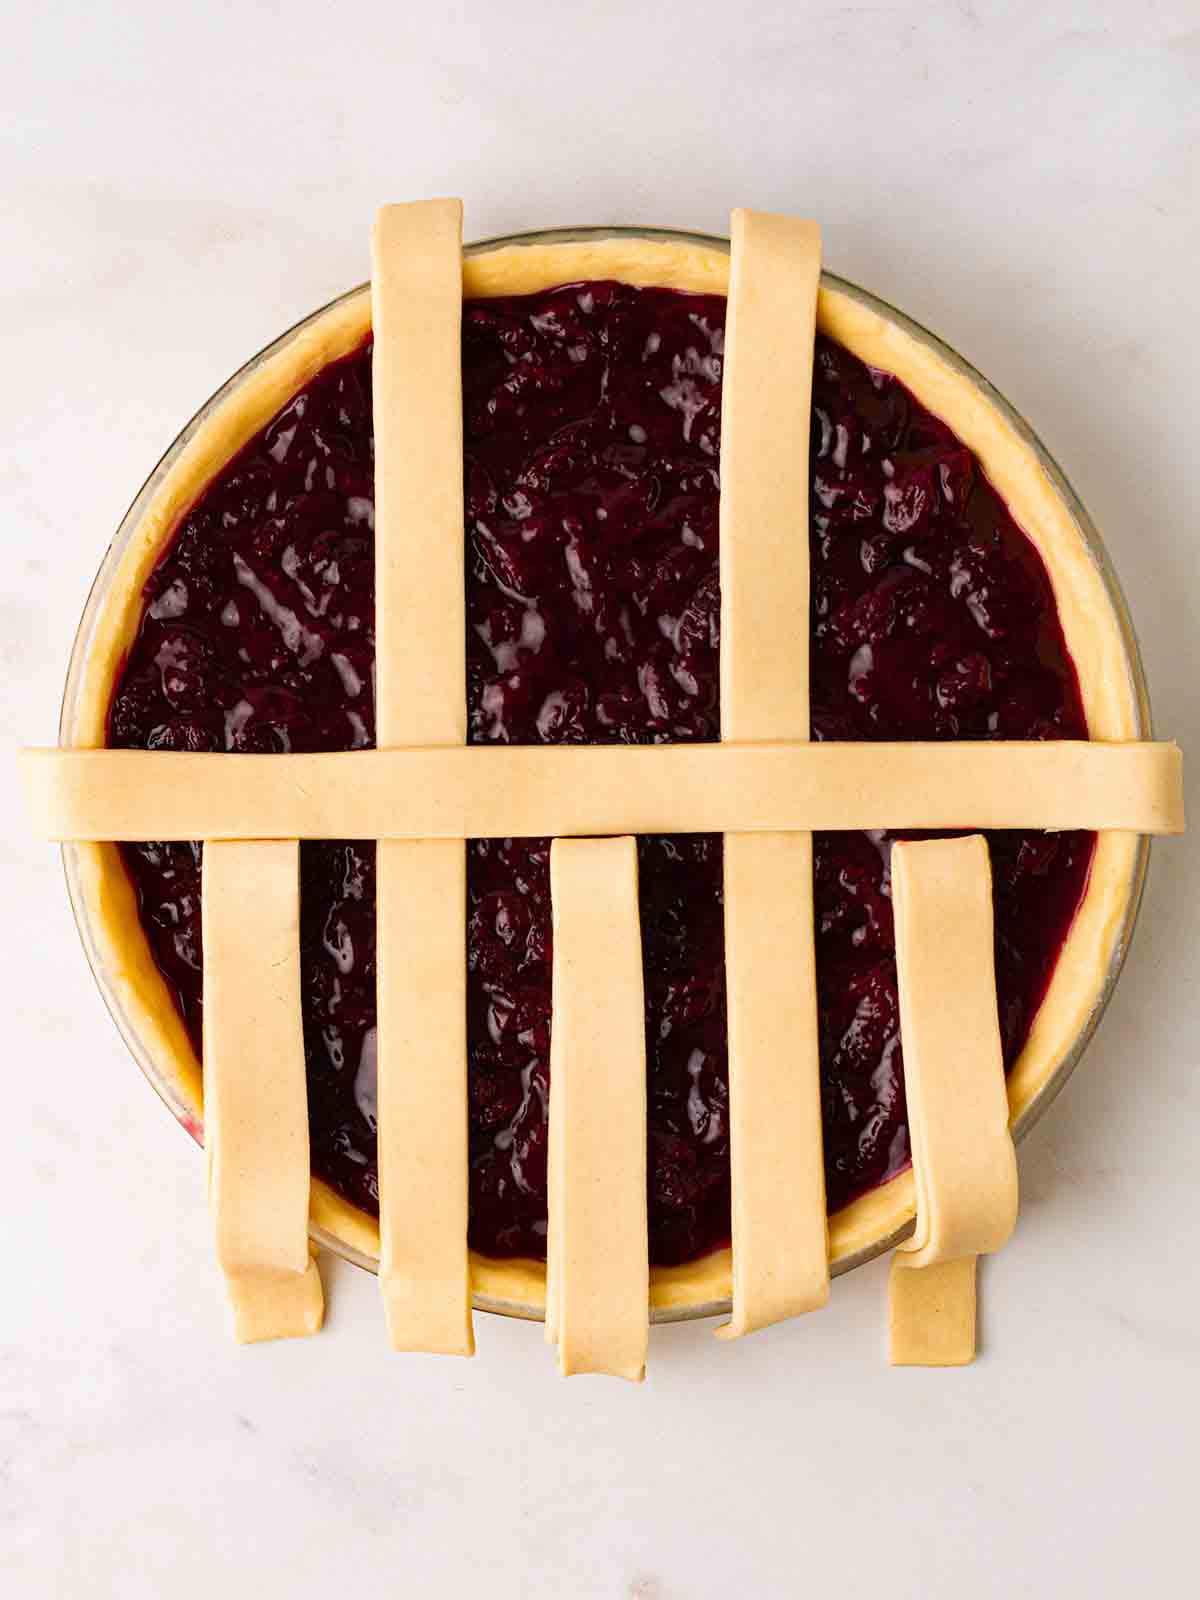 Looking down on an unbaked cherry pie, with a partially constructed lattice topping for step 5 in the recipe.